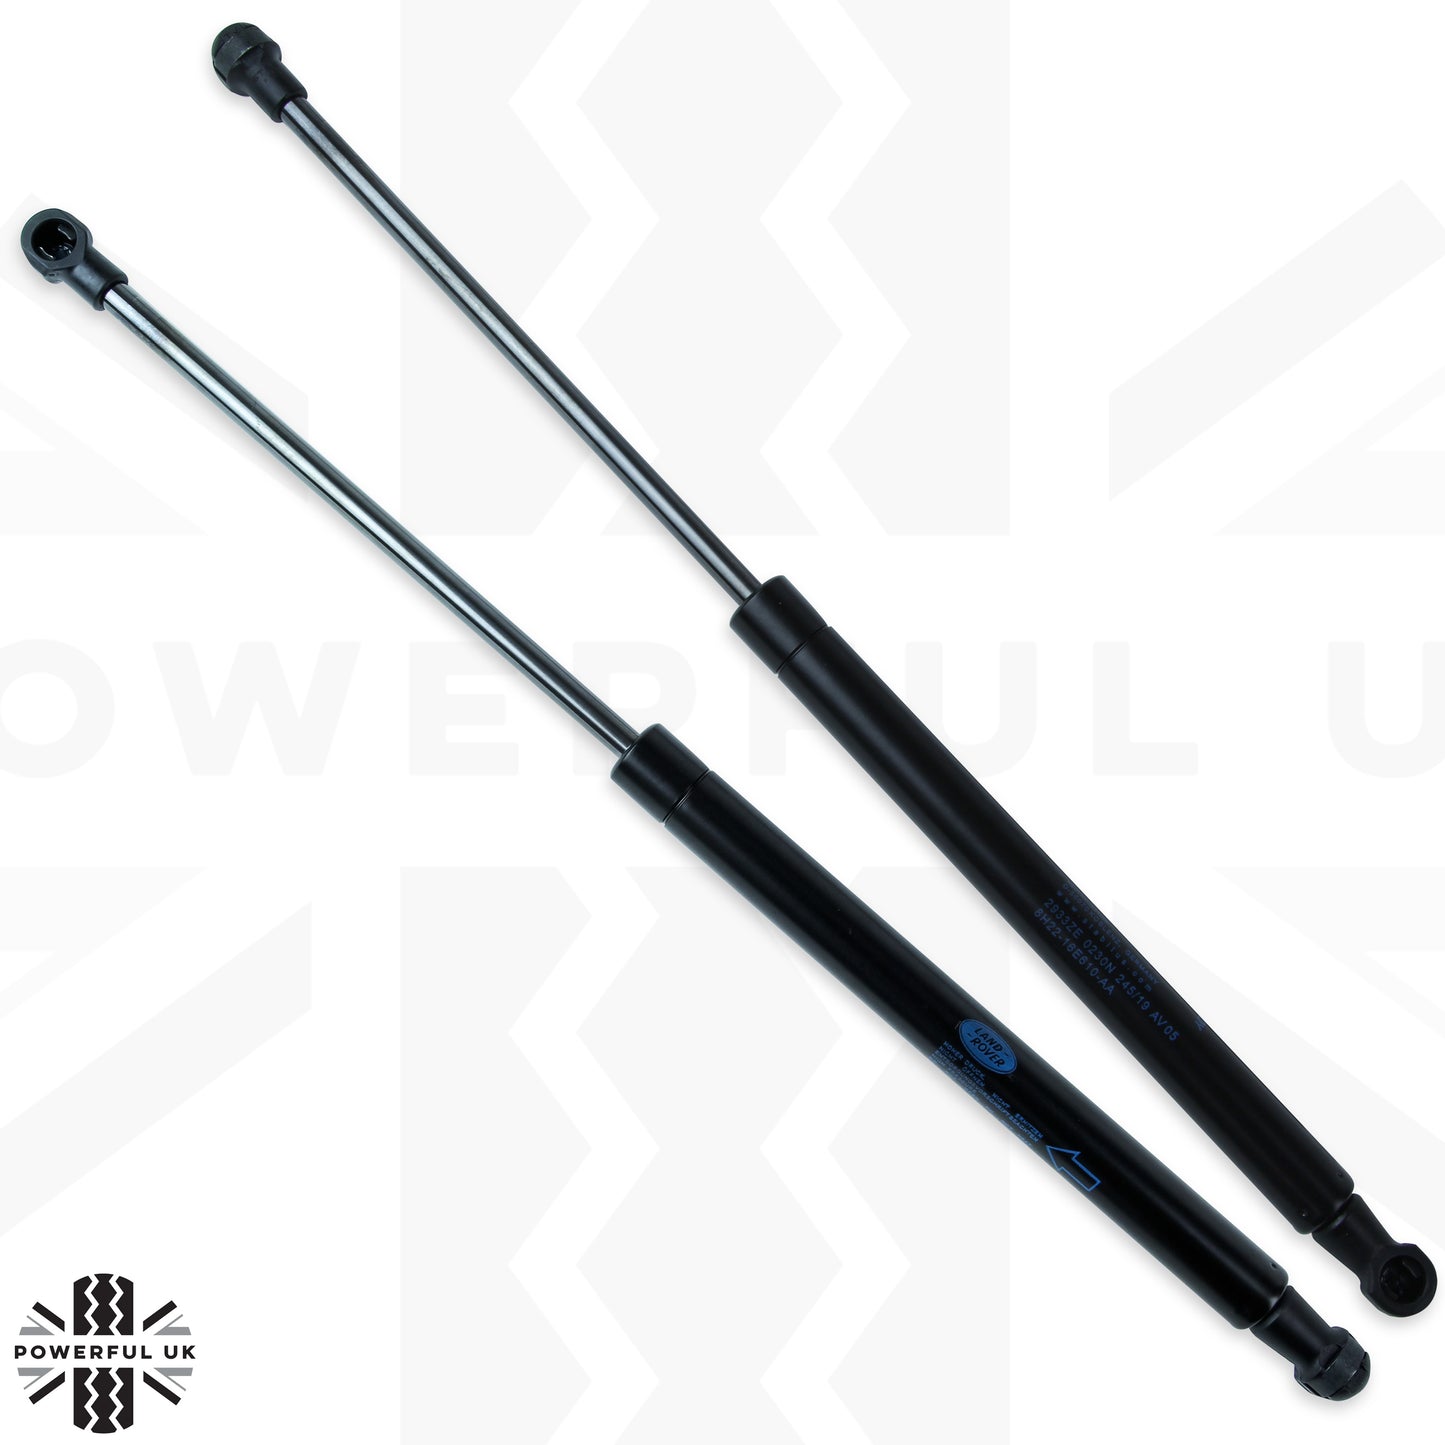 Bonnet Gas Struts for Land Rover Discovery 3 & 4 - Genuine - PAIR